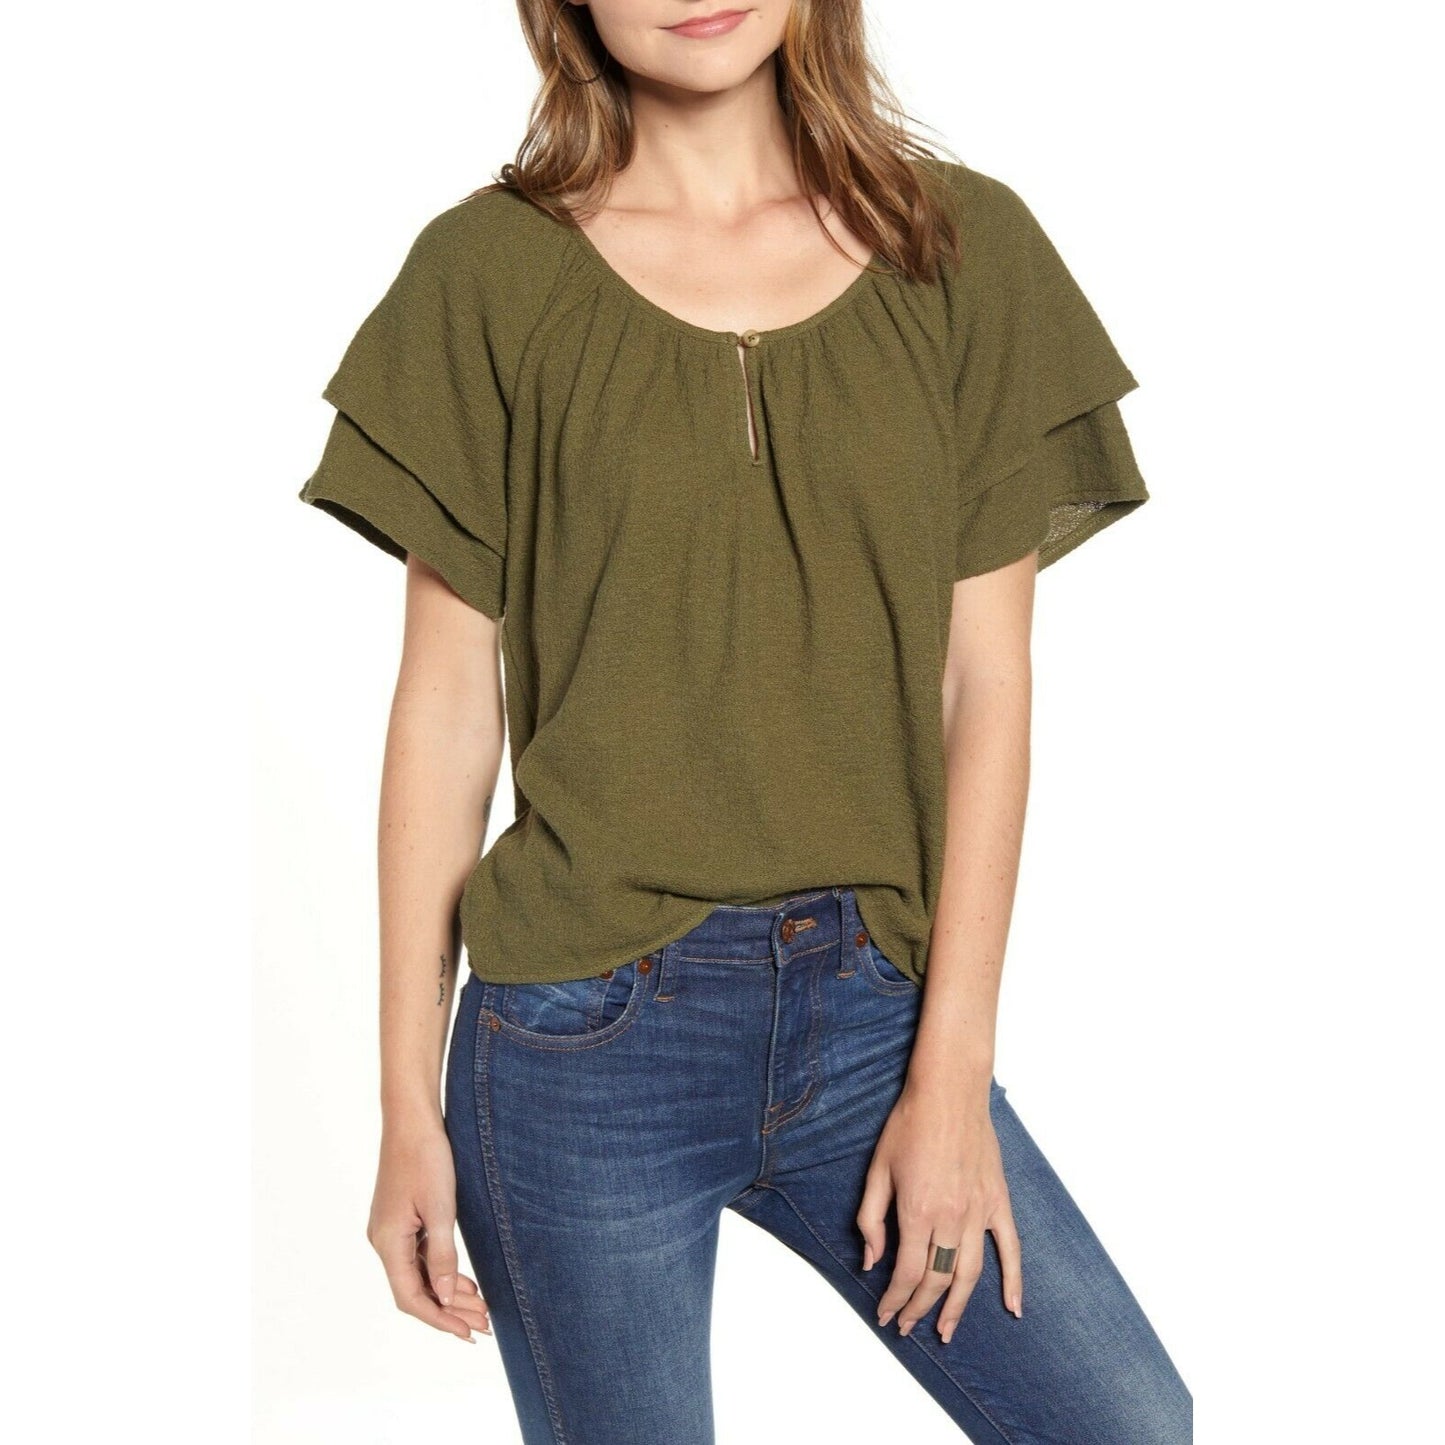 NWT Women's Madewell Texture & Thread Tiered Sleeve Top, Size X-Small - Green